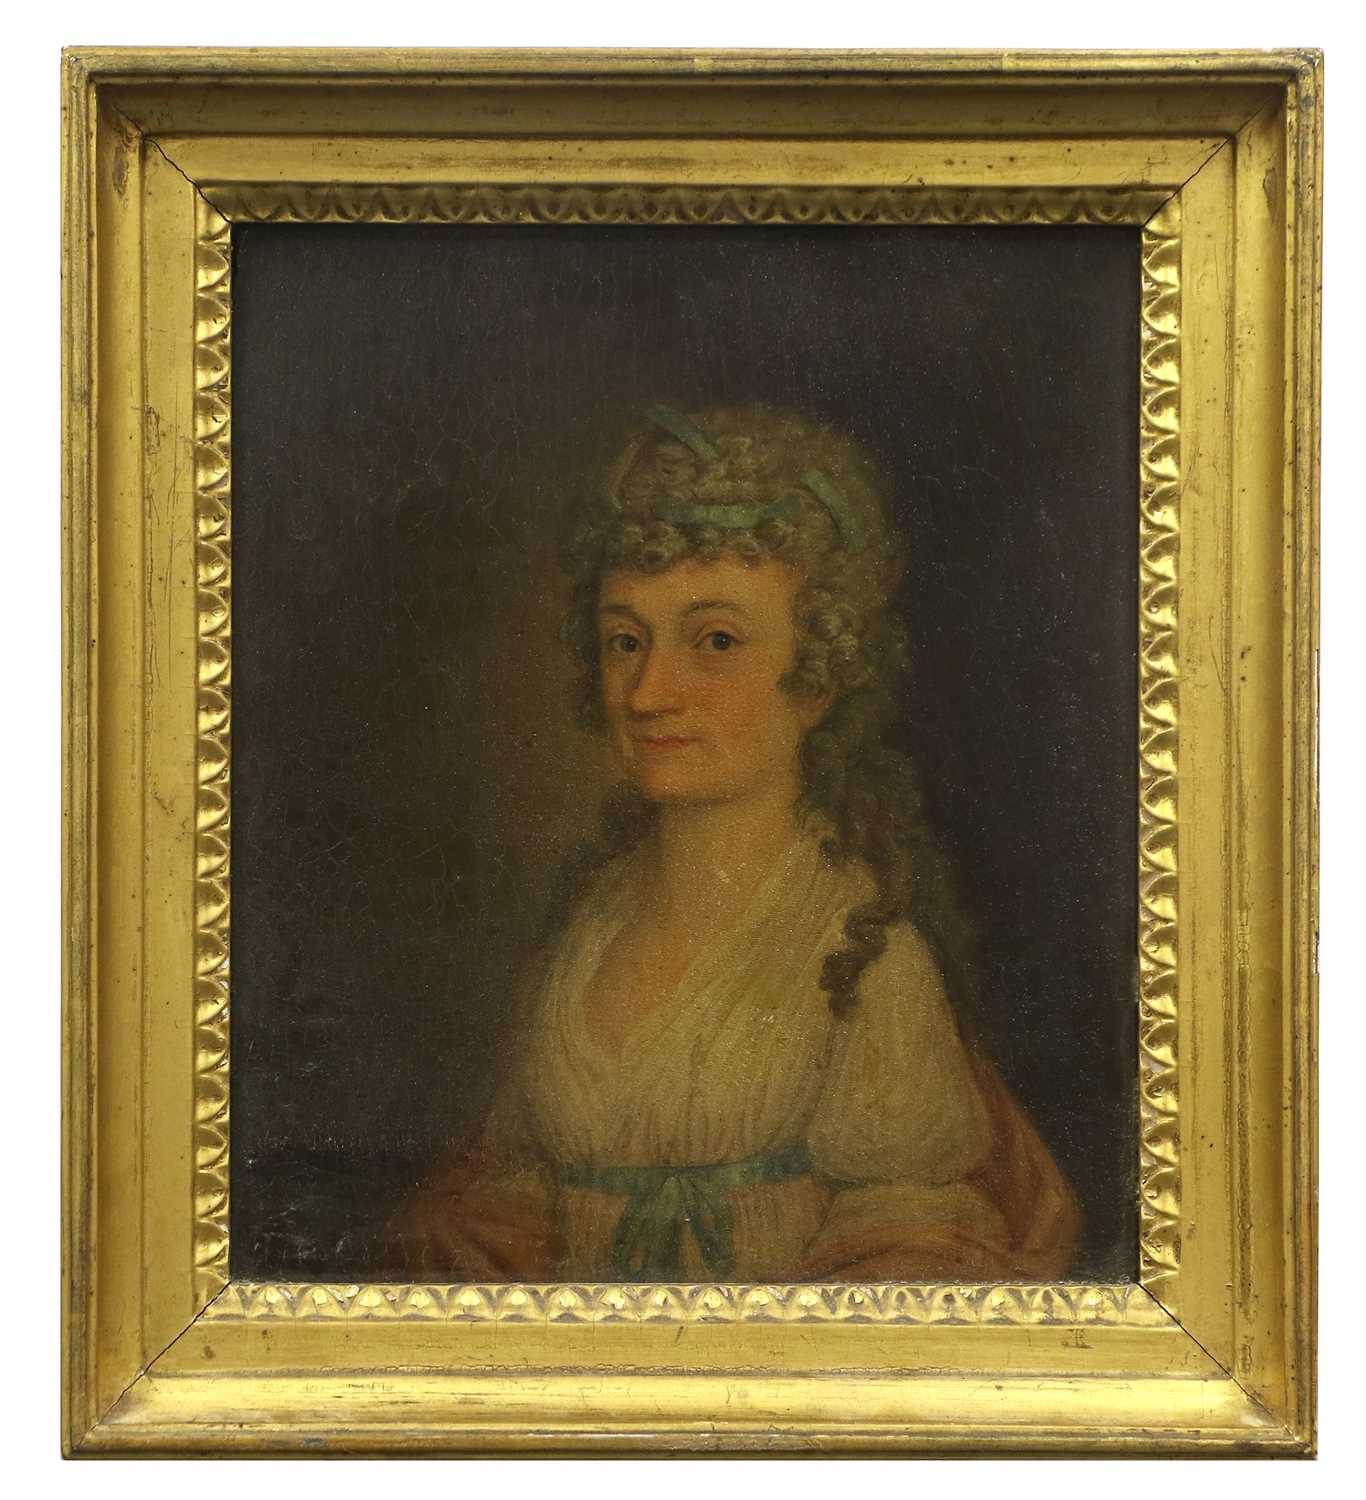 British School (Early 19th Century) Portrait of a lady, half-length seated, wearing blue ribbons - Image 2 of 3